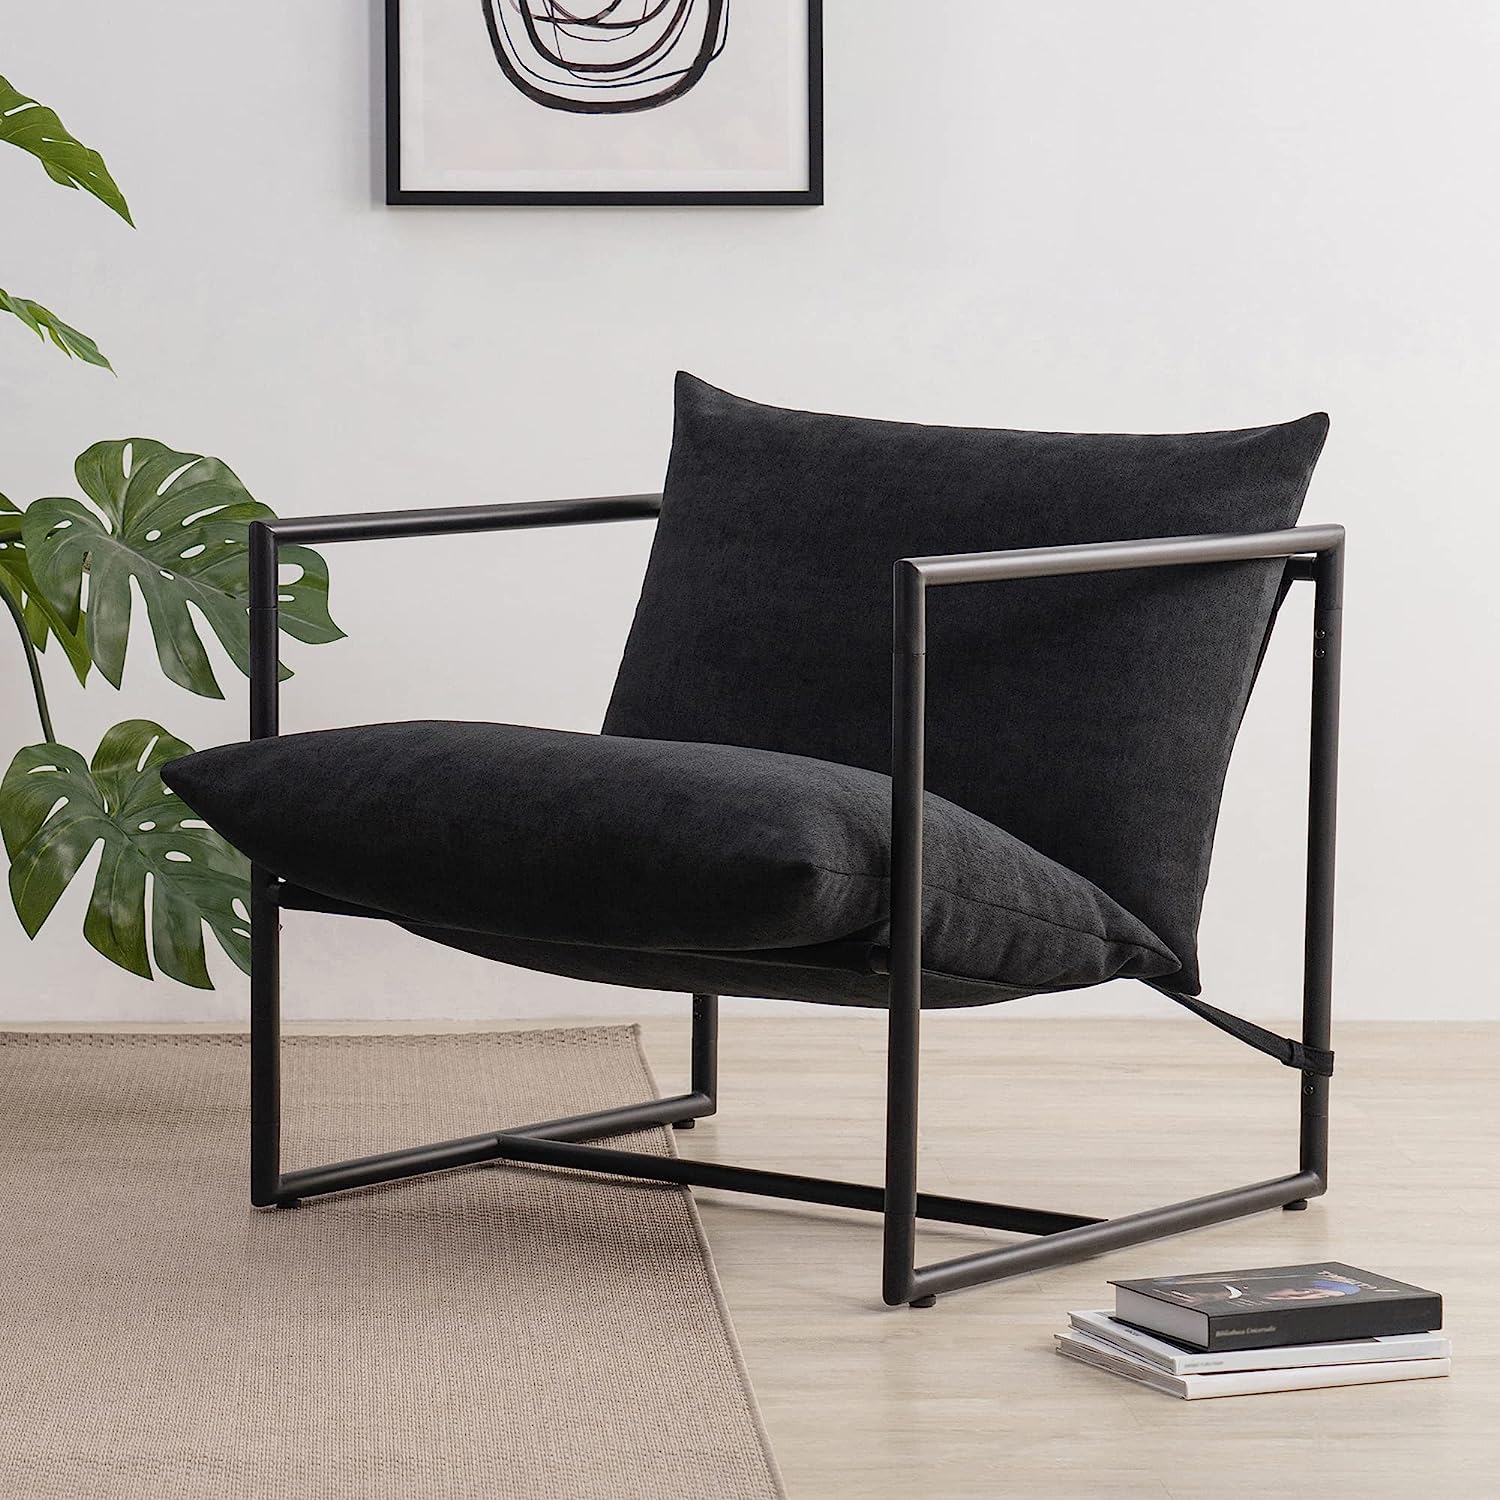 attractive cheap comfy chair for living room entryway home office lounge seat for sale online metal frame with overstuffed black cushions sling seat construction minimalistic comfort